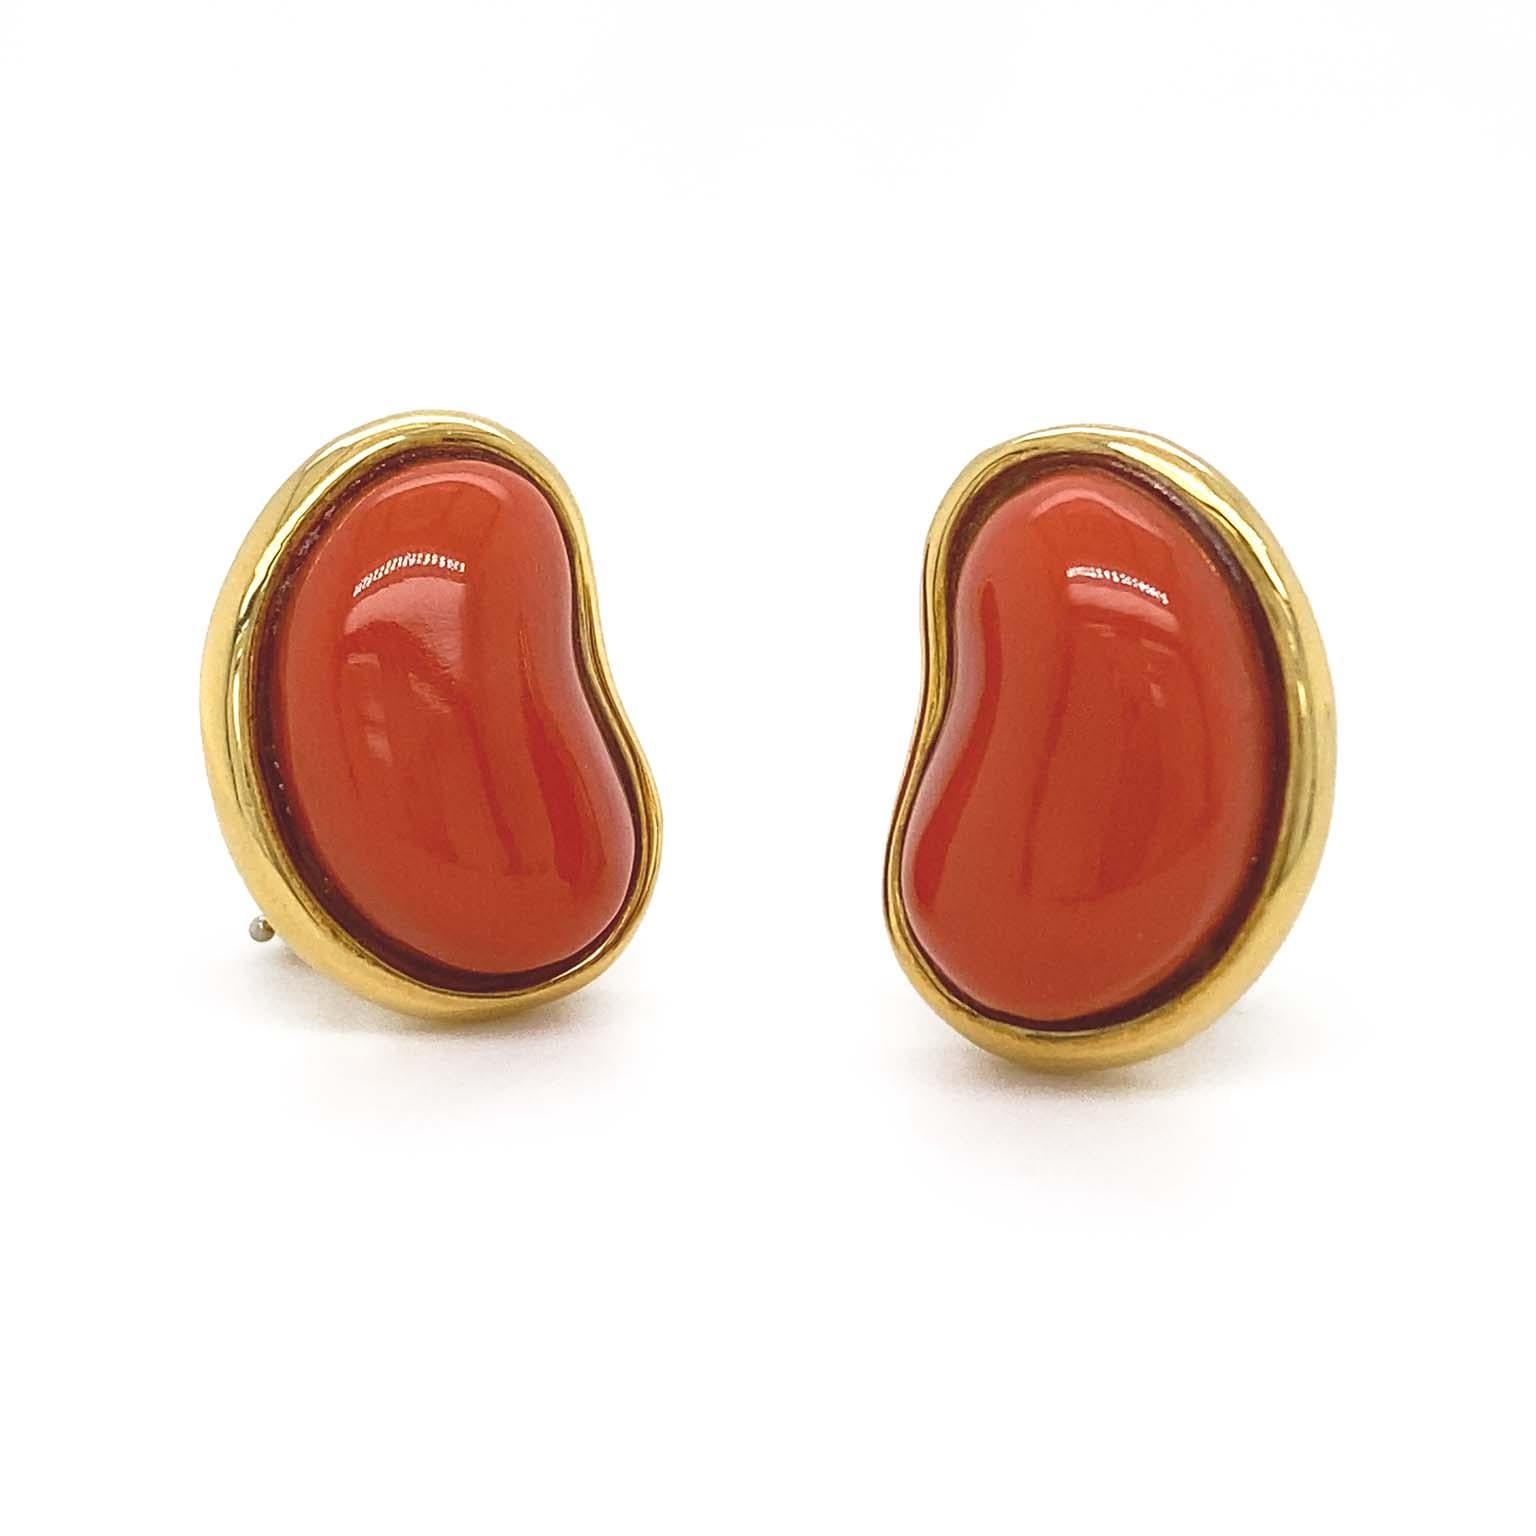 The blazing hue of polished red coral is the luminary of these earrings. The gem is carved into a bean shaped cabochon with its curve turned inward. Set in 18k yellow gold, the metal brings both accent and light. The total weight is 3.8 carats of